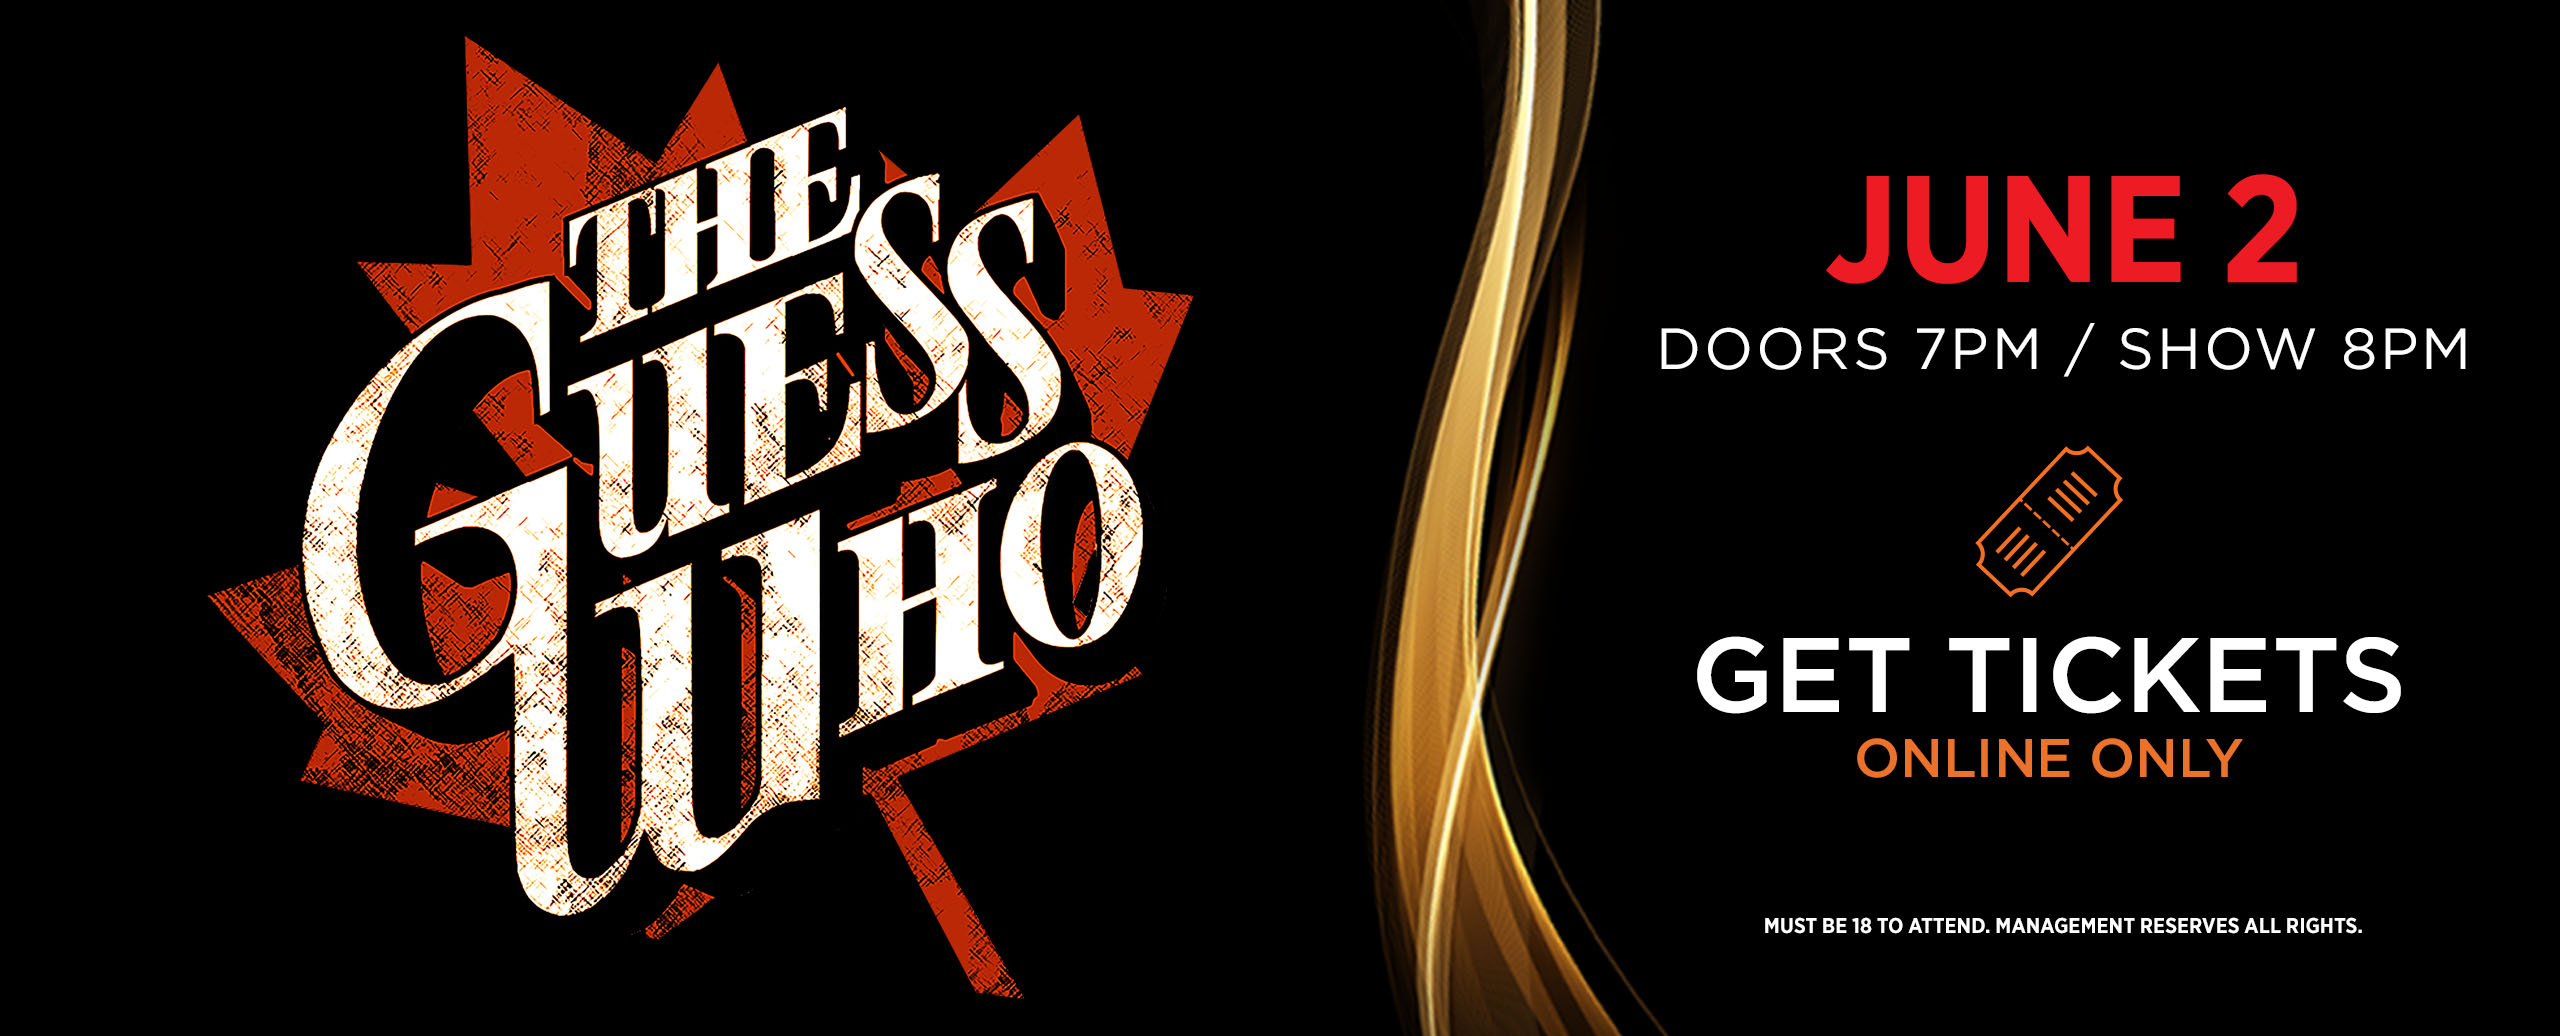 The Guess Who | June 2 - Osage Casino Hotel